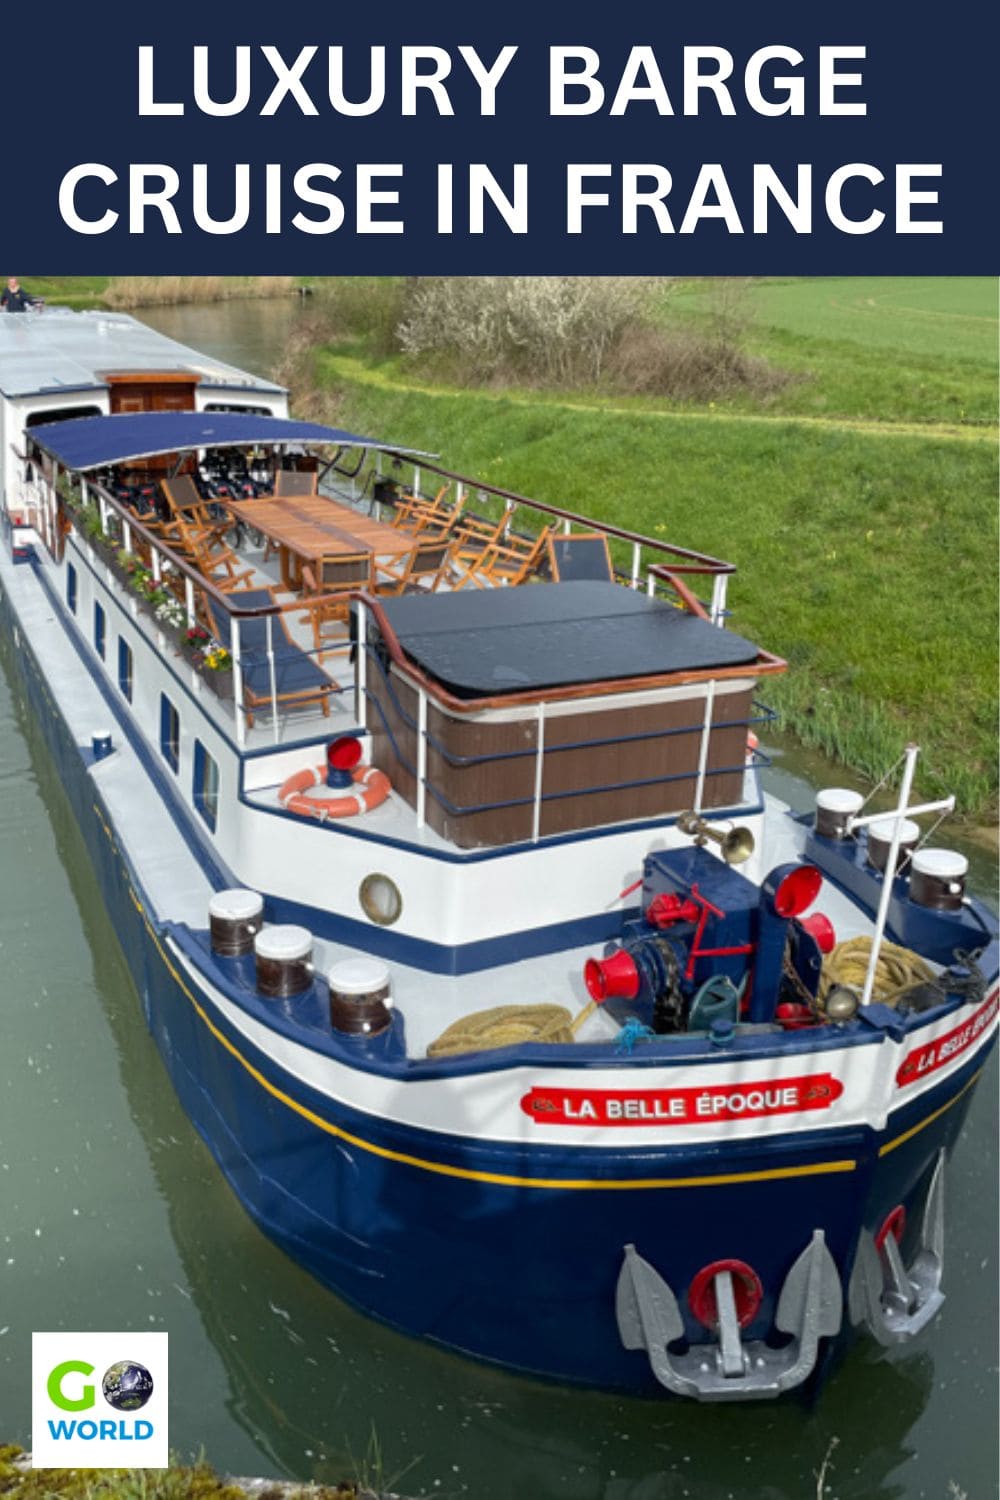 An immersive barge cruise in France takes you along Burgundy's canals while providing luxury service, gourmet dining and stunning scenery. #France #canalbargecruise